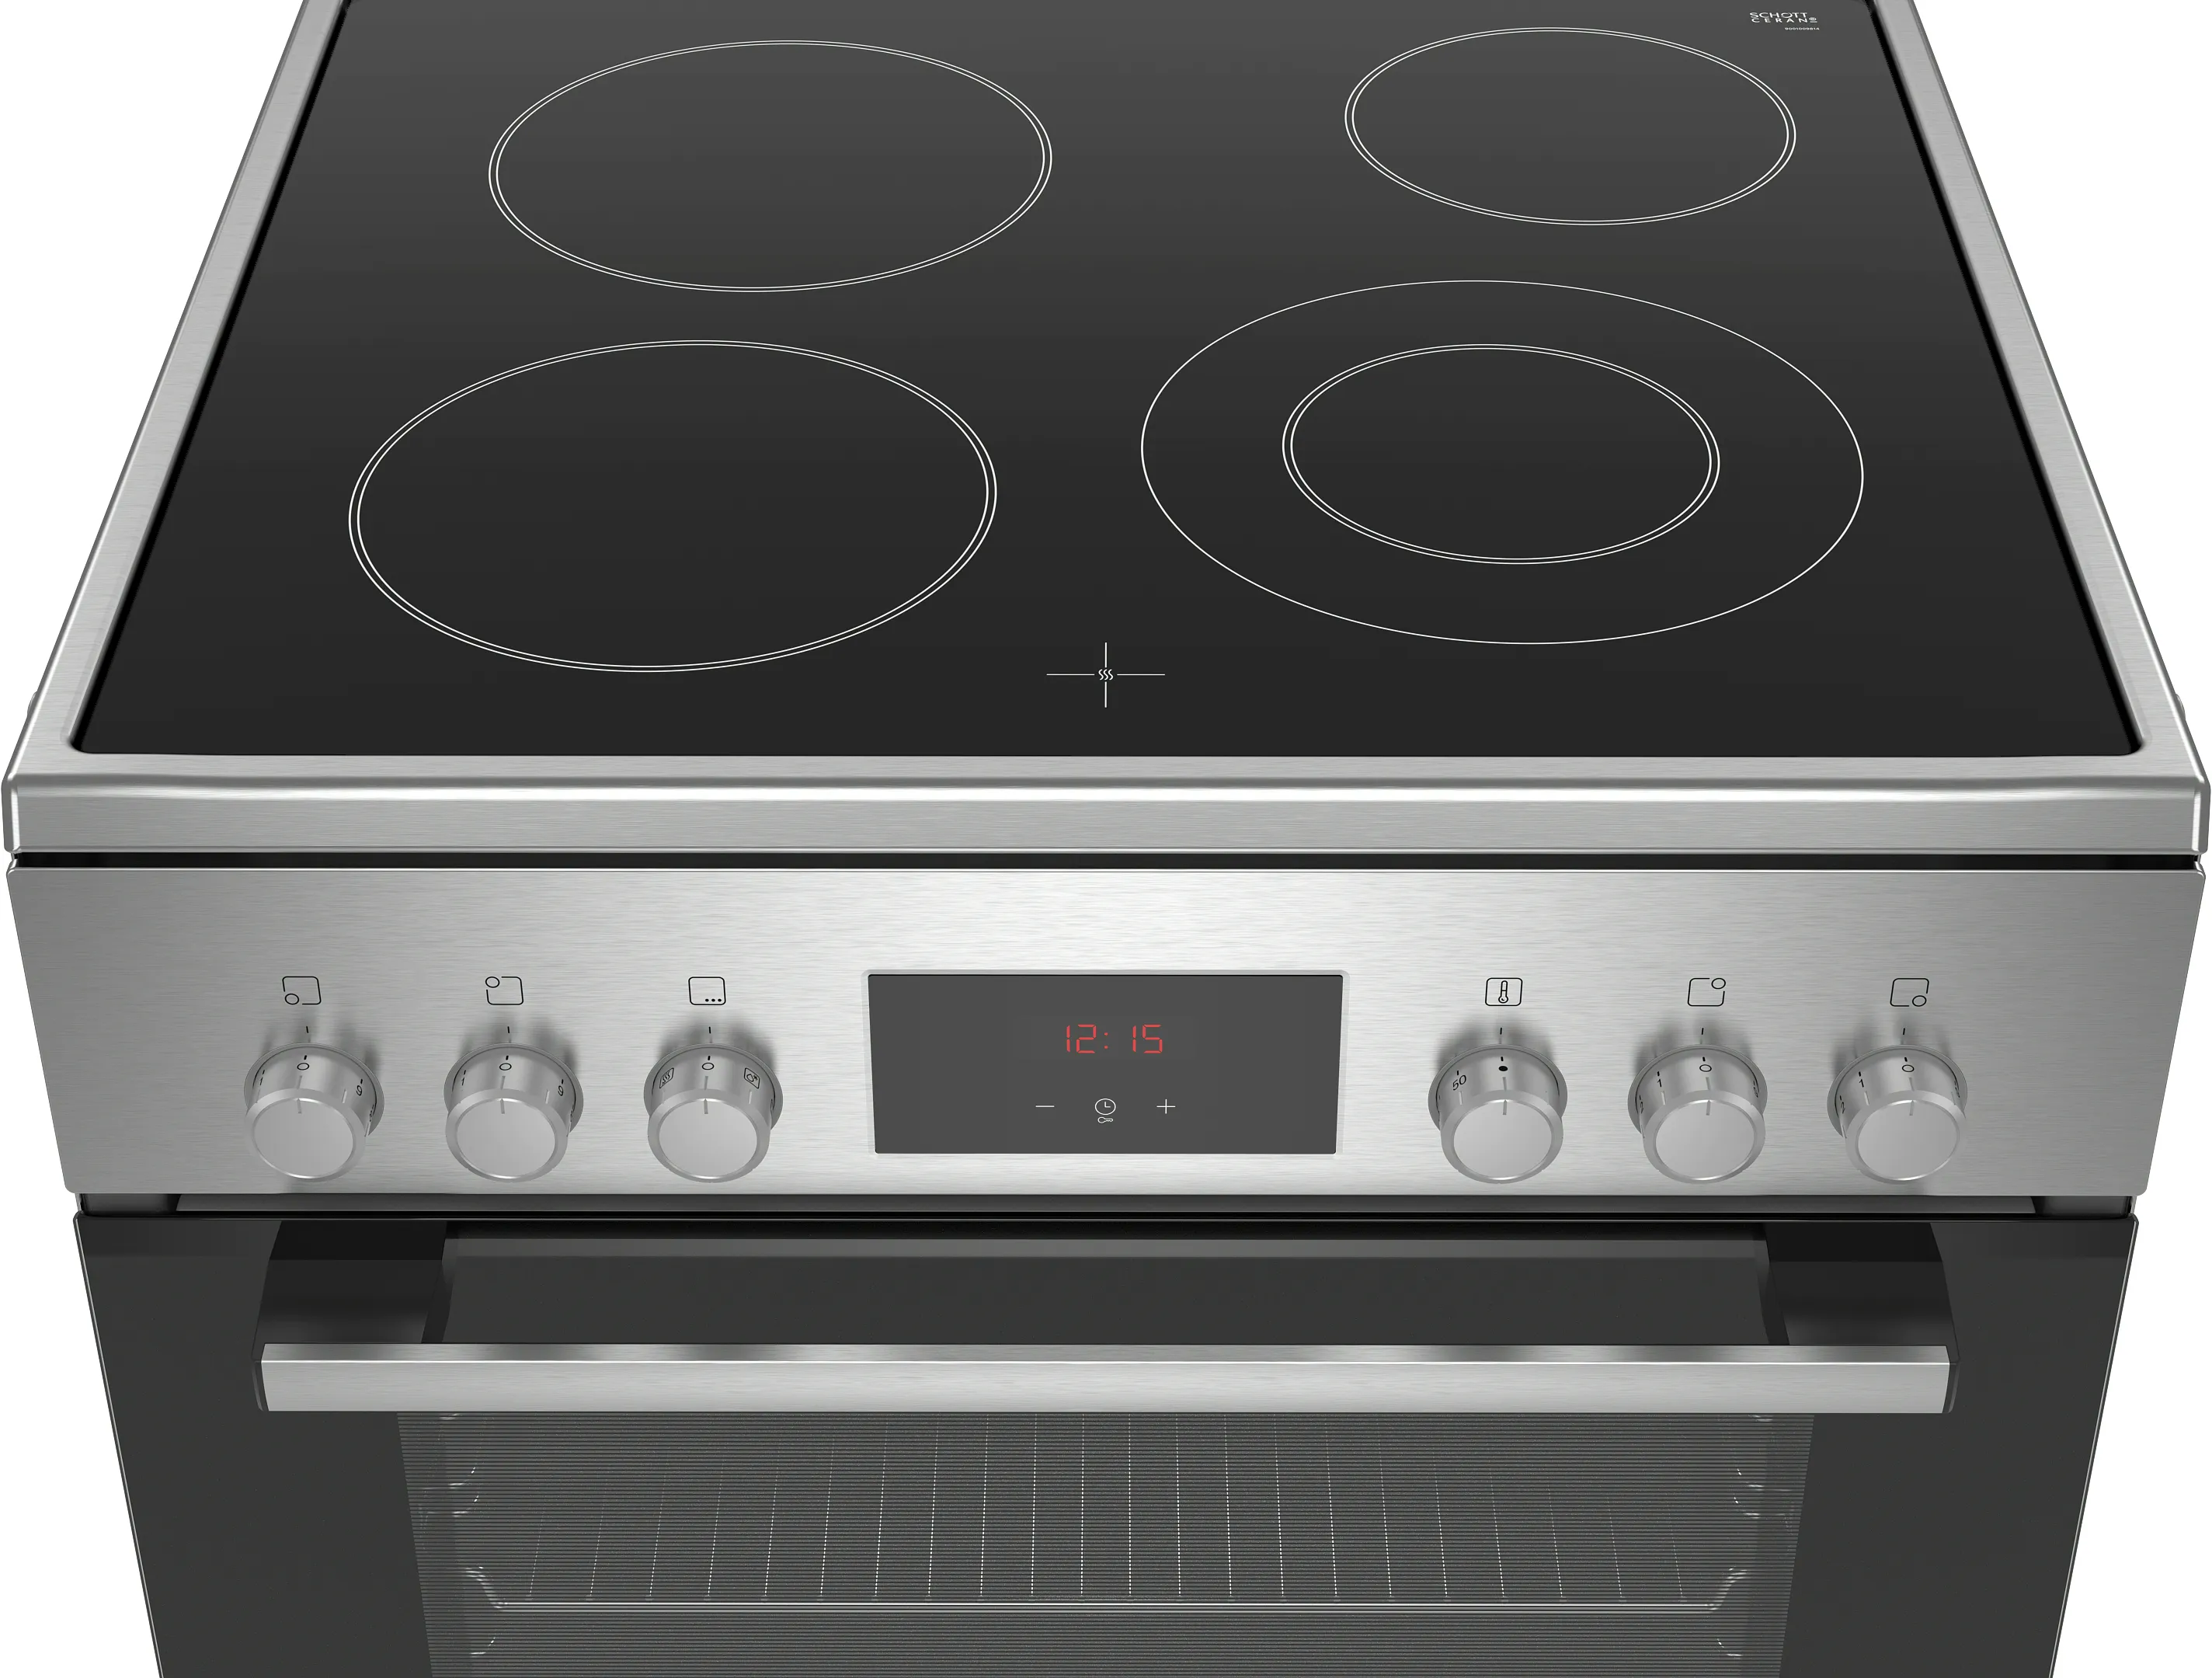 HKQ38A150M free-standing electric cooker